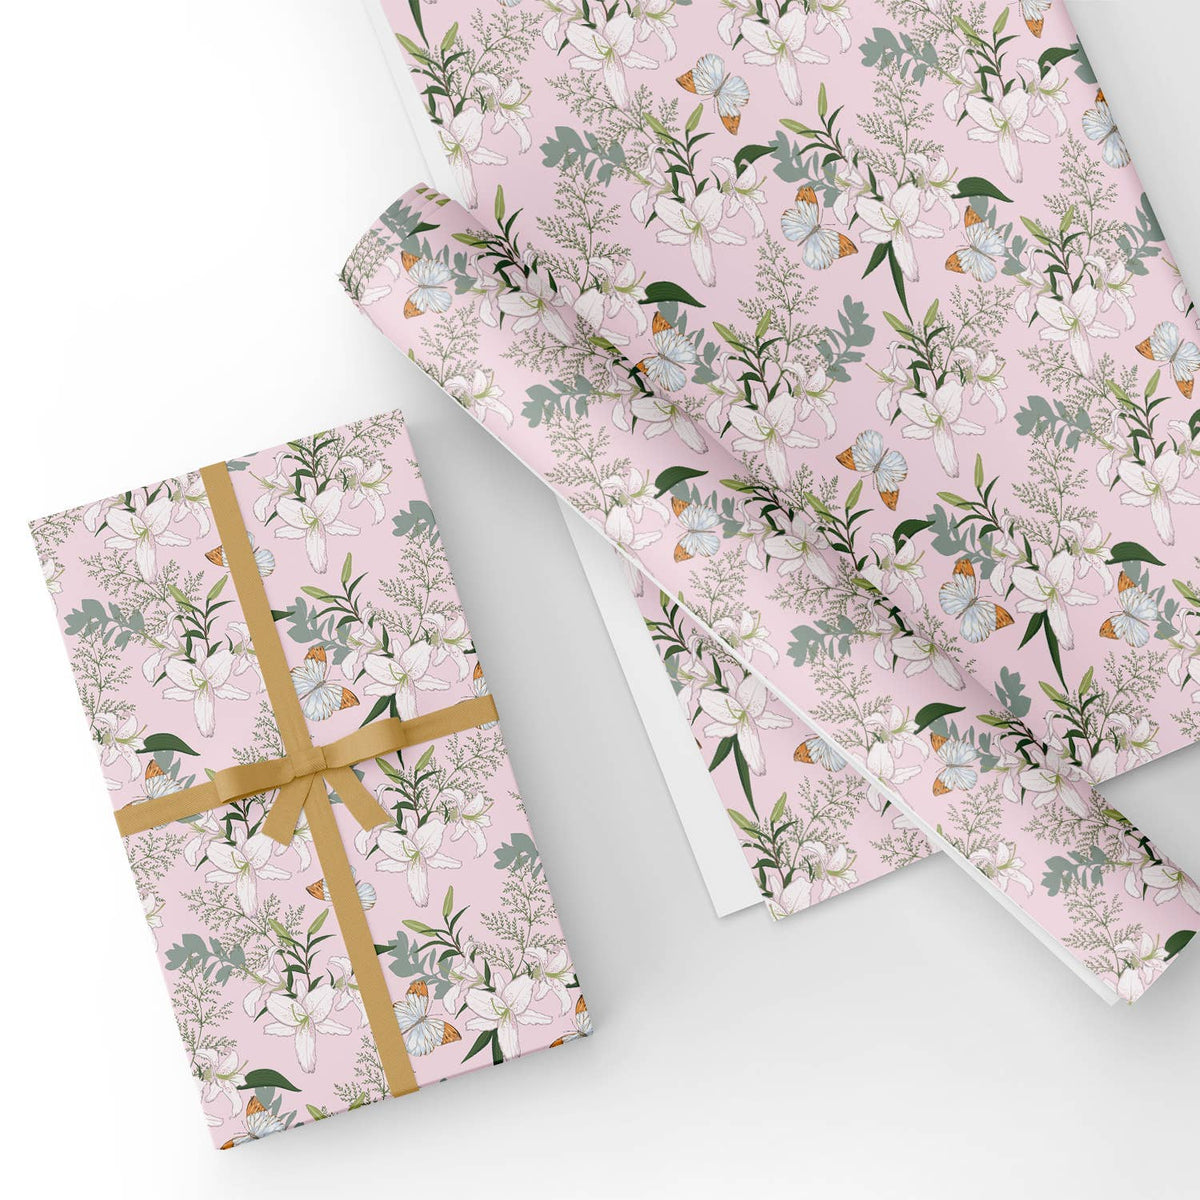 Custom Wrapping Paper Sheets for Wedding, Birthday, Mothers Day, Congrats-  Elegant Lily Floral with Butterfly in Pink, Bulk Wrapping Paper Printed